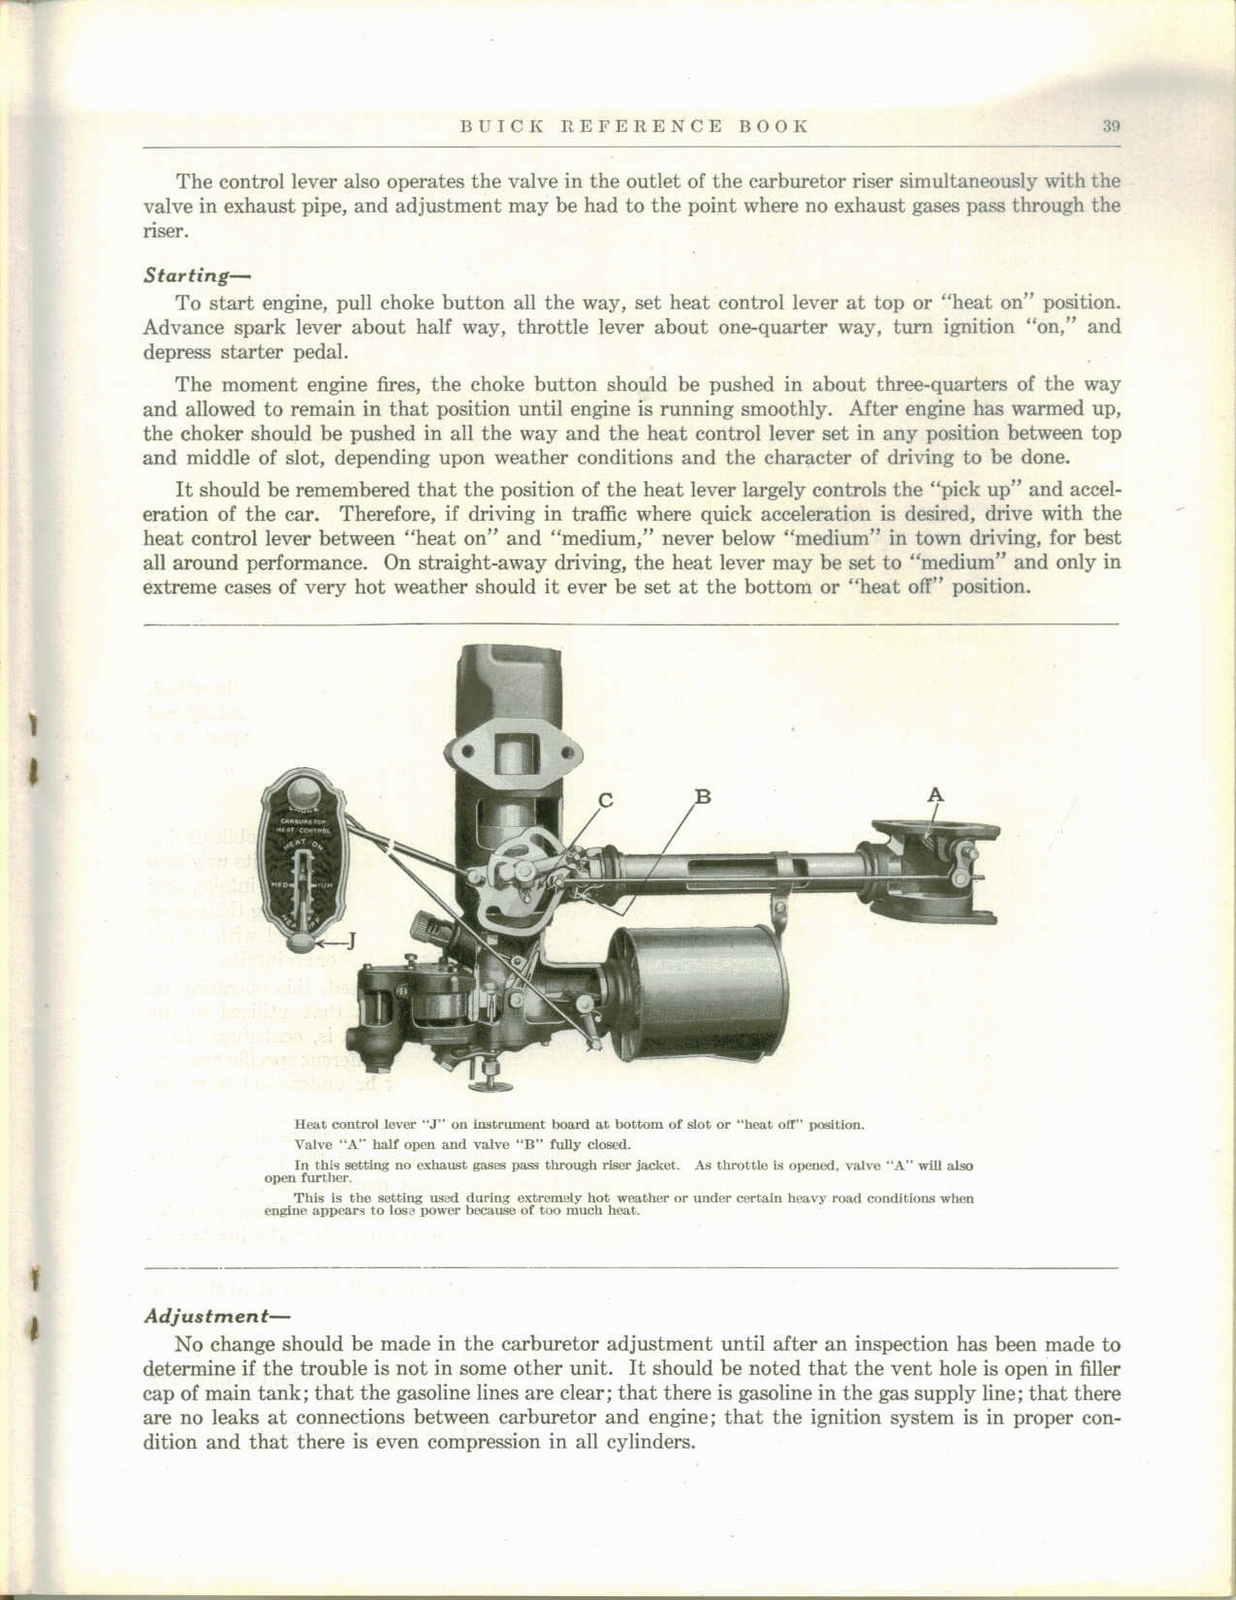 n_1928 Buick Reference Book-39.jpg